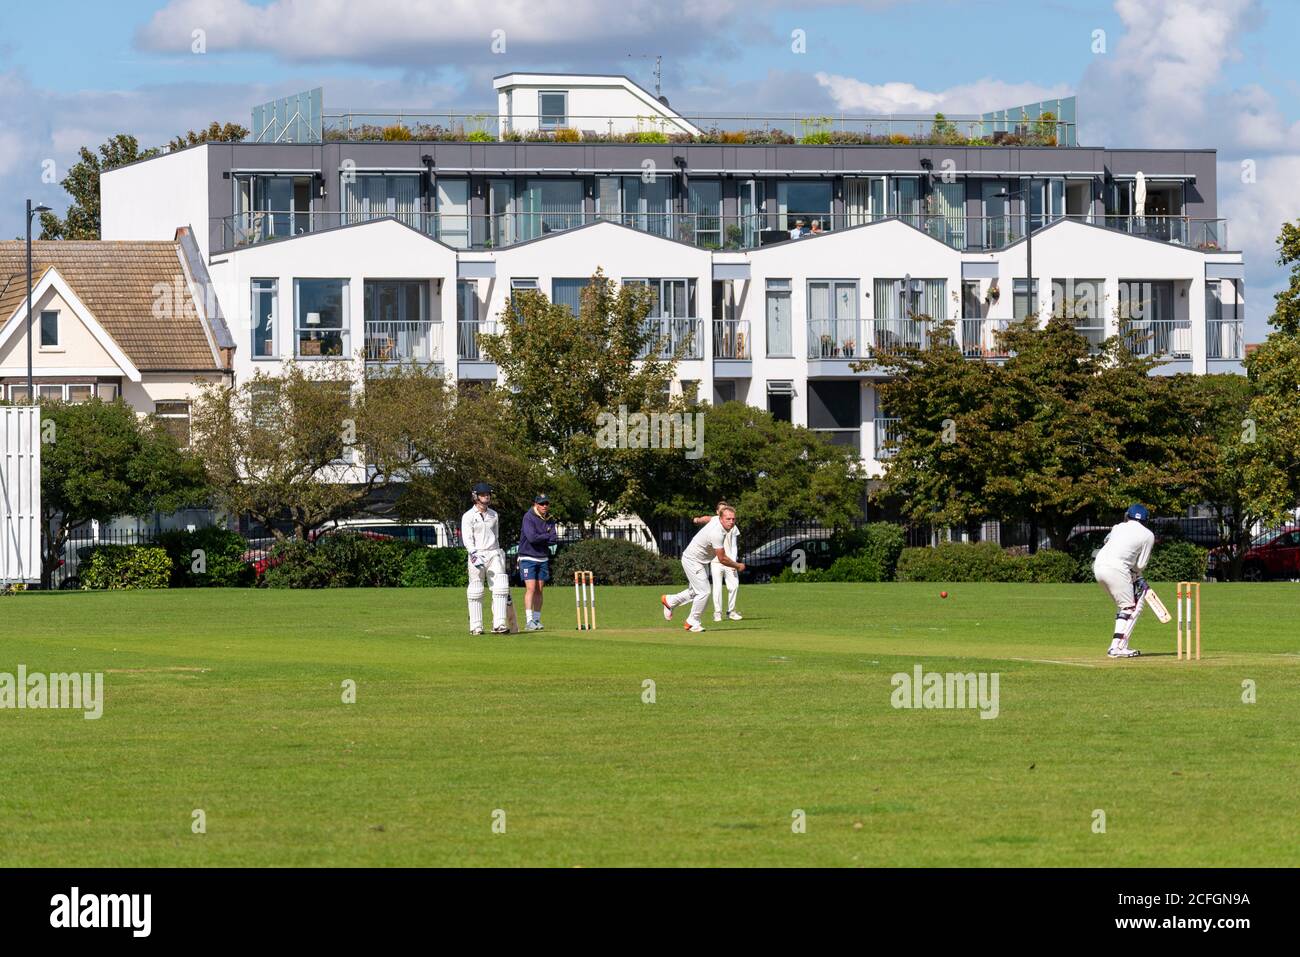 Cricket being played in Chalkwell Park, Westcliff on Sea, Southend, Essex, UK. Flats, apartments overlooking the park, London Road. Bowler bowling Stock Photo